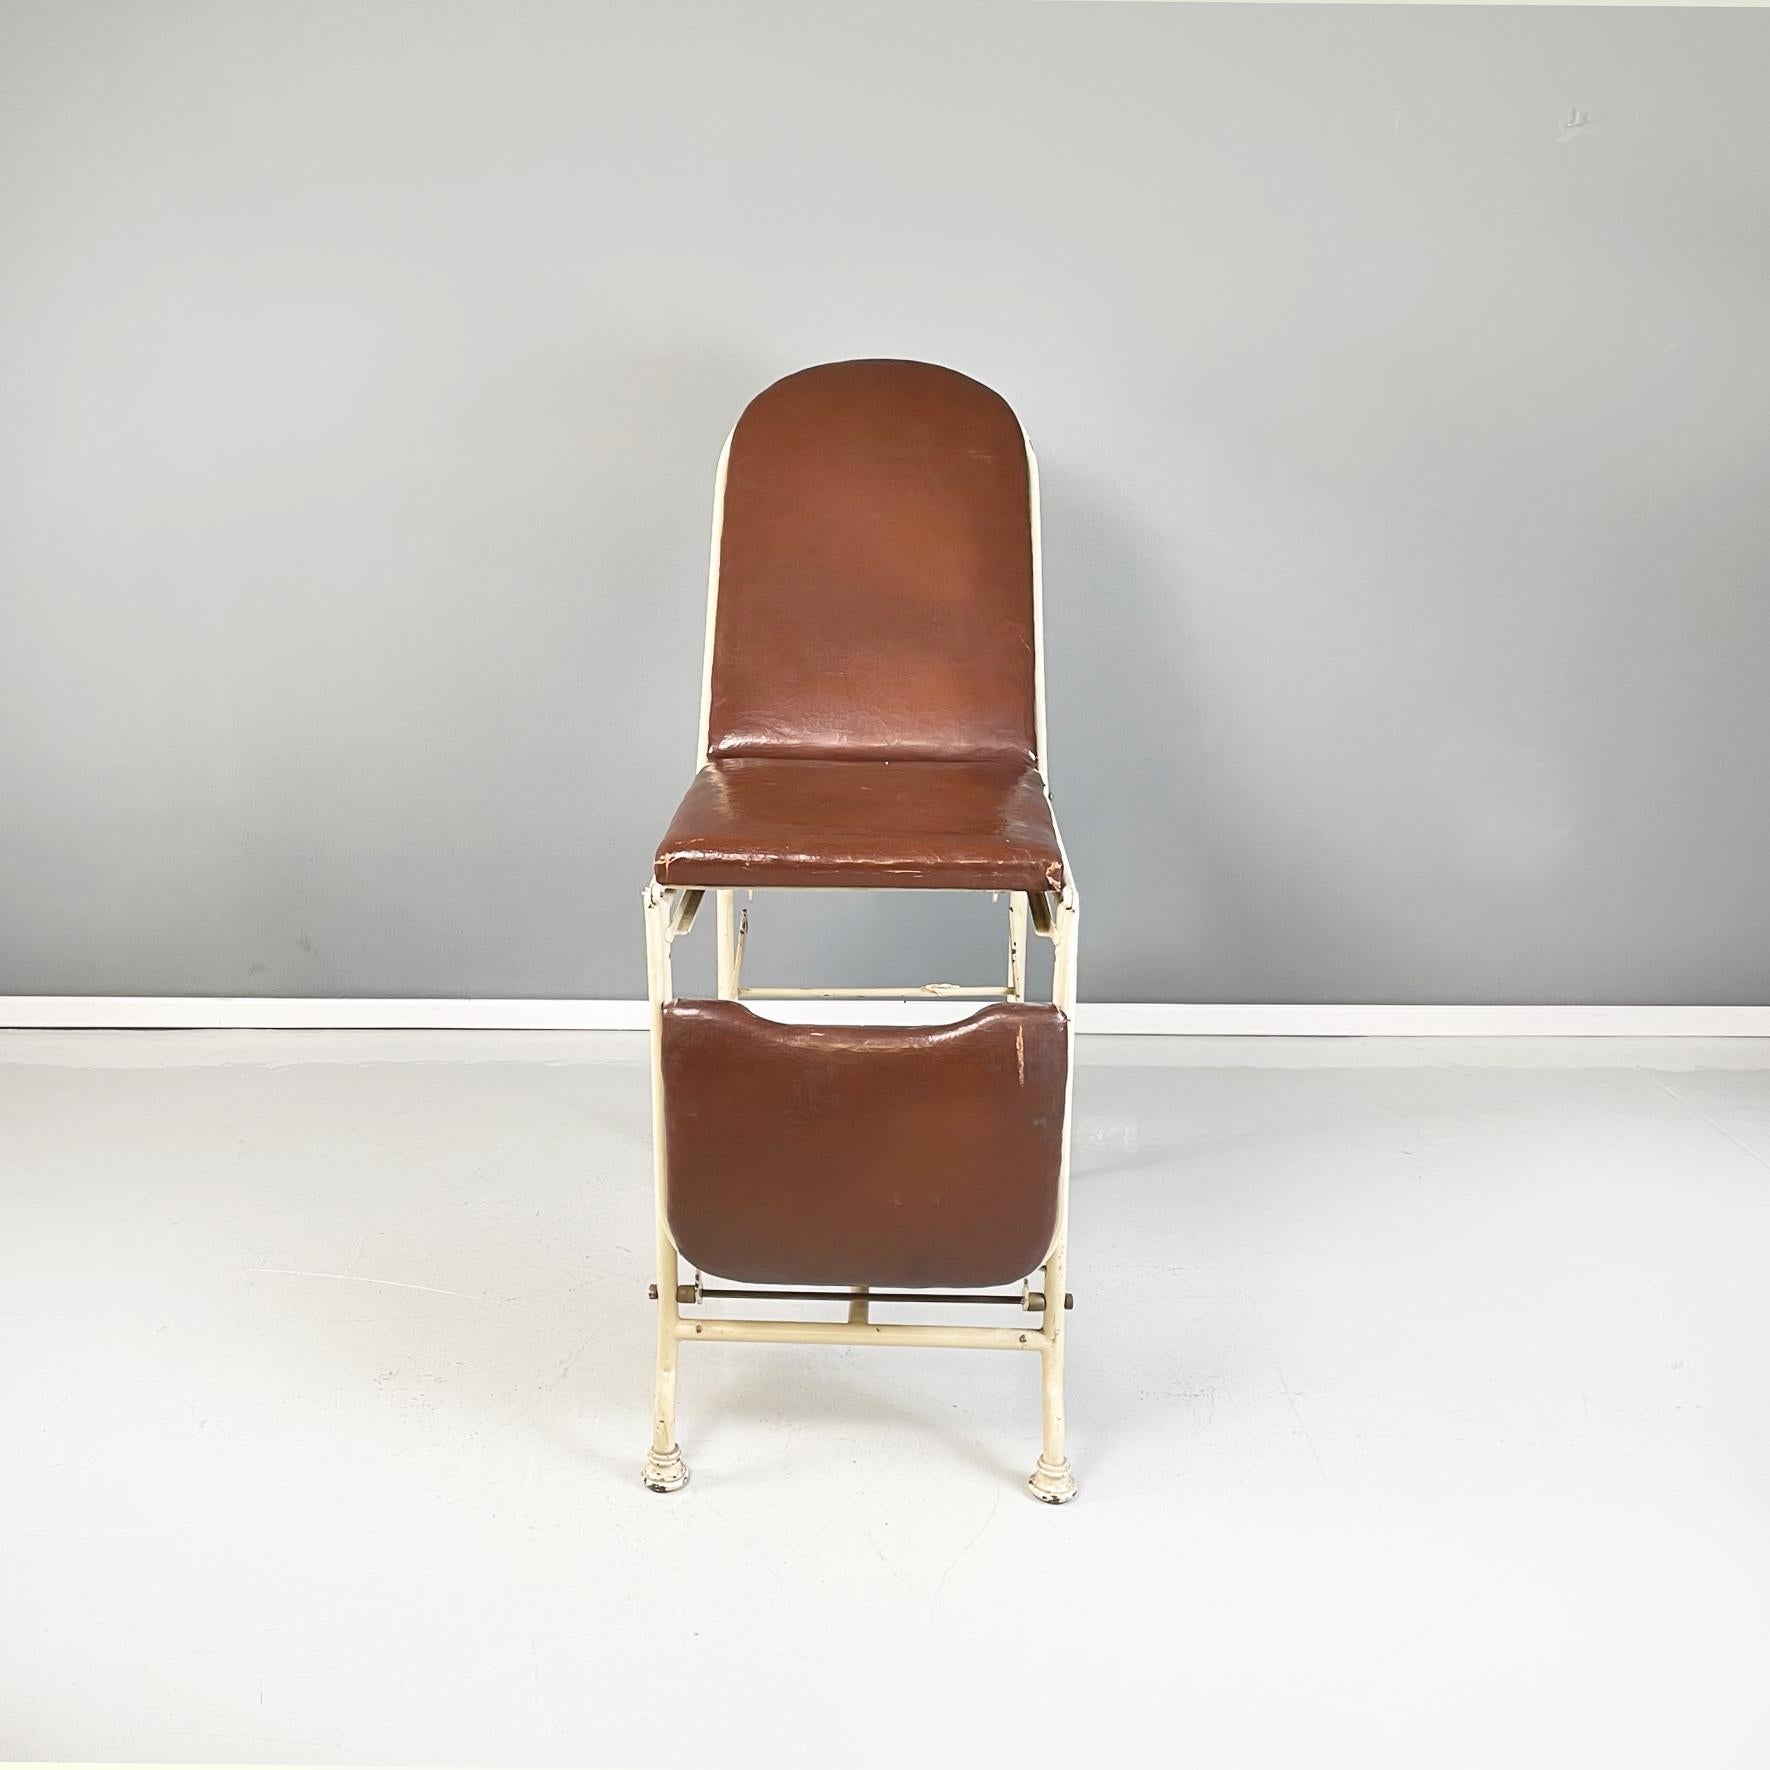 Italian mid-century Medical laboratory bed brown leather and white metal, 1940s
Medical laboratory bed with cream white painted metal structure. The backrest, footrest and seat are padded and covered in brown leather. The backrest, like the